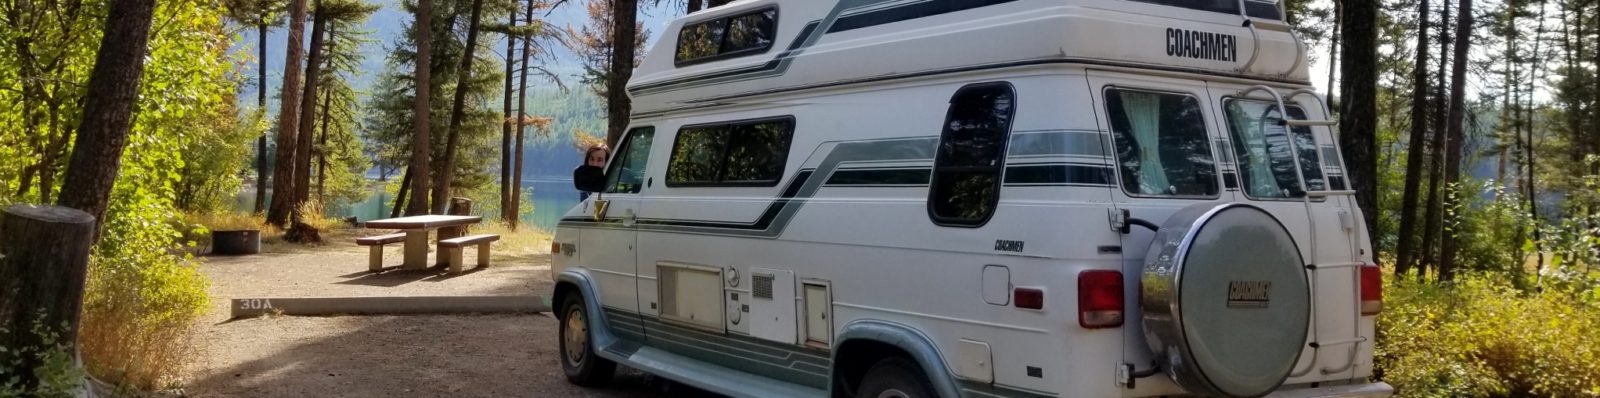 Jimmy photo-bombing our campervan, Dot, at our campsite in Holland Lake